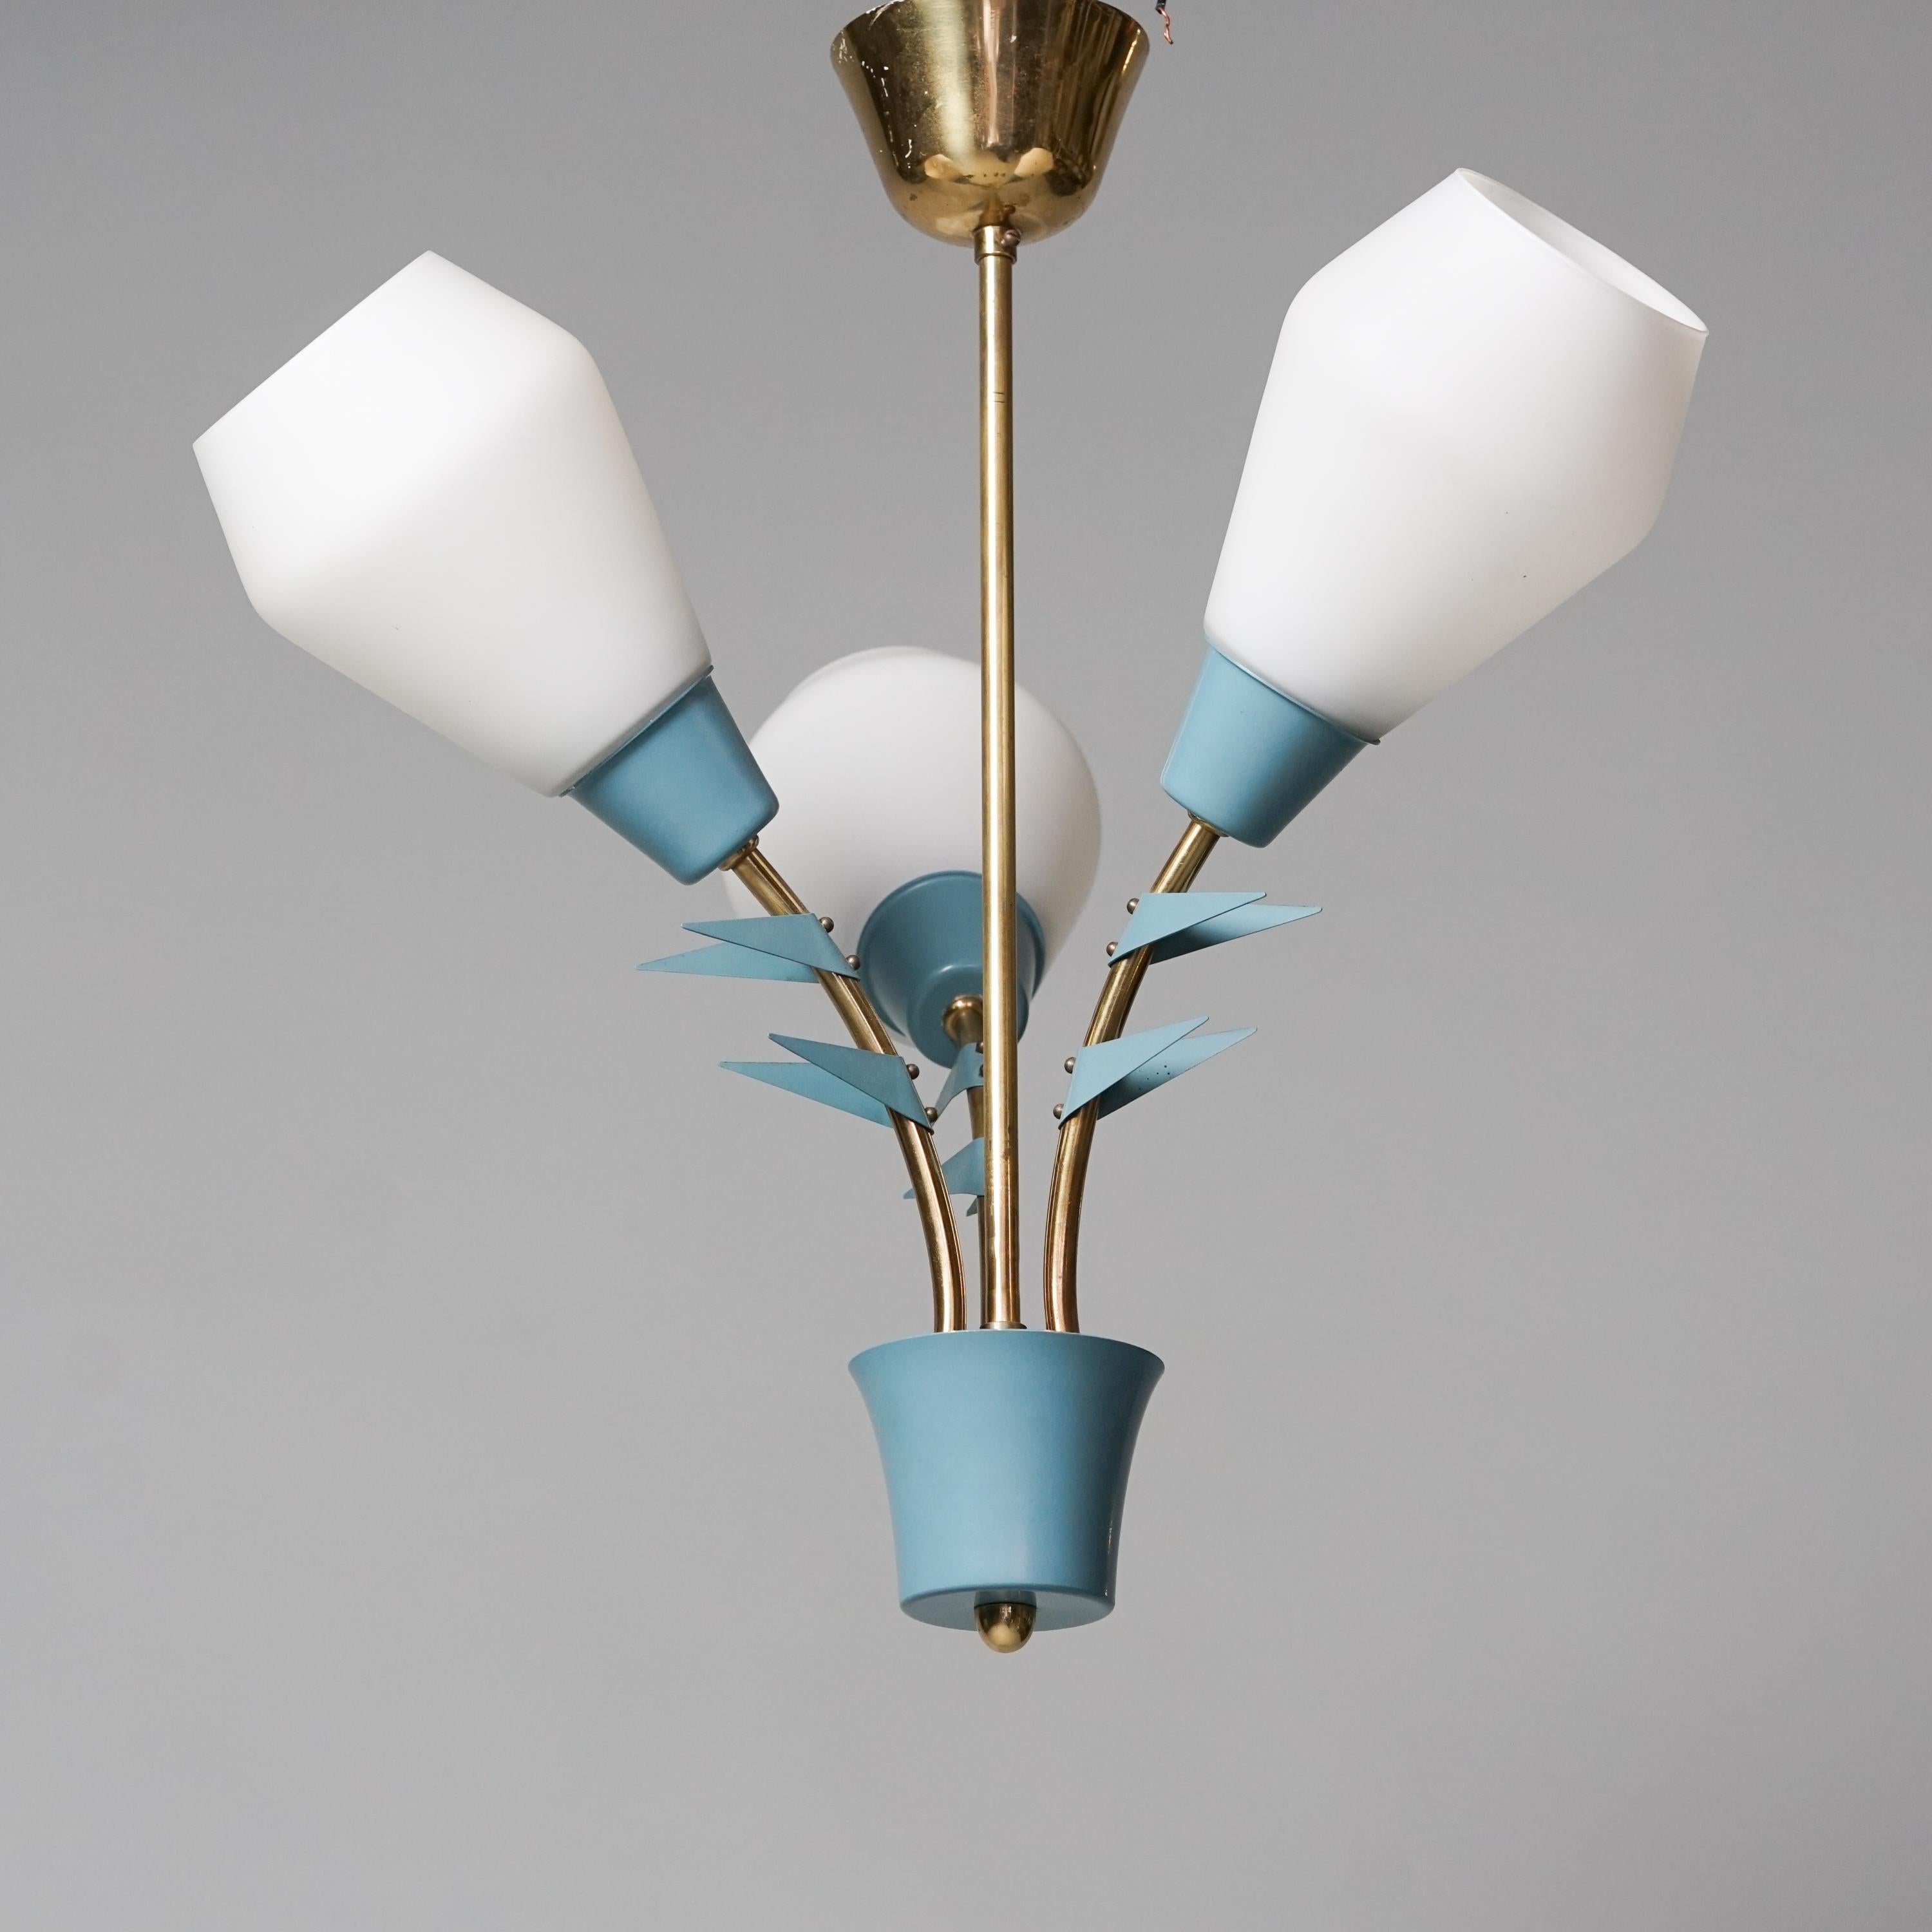 Pendant, designed by Maria Lindeman, manufactured by Idman Oy, 1950s. Painted metal and brass with milk glass shades. Marked. Good vintage condition minor patina consistent with age and use. Beautiful leaf details. 